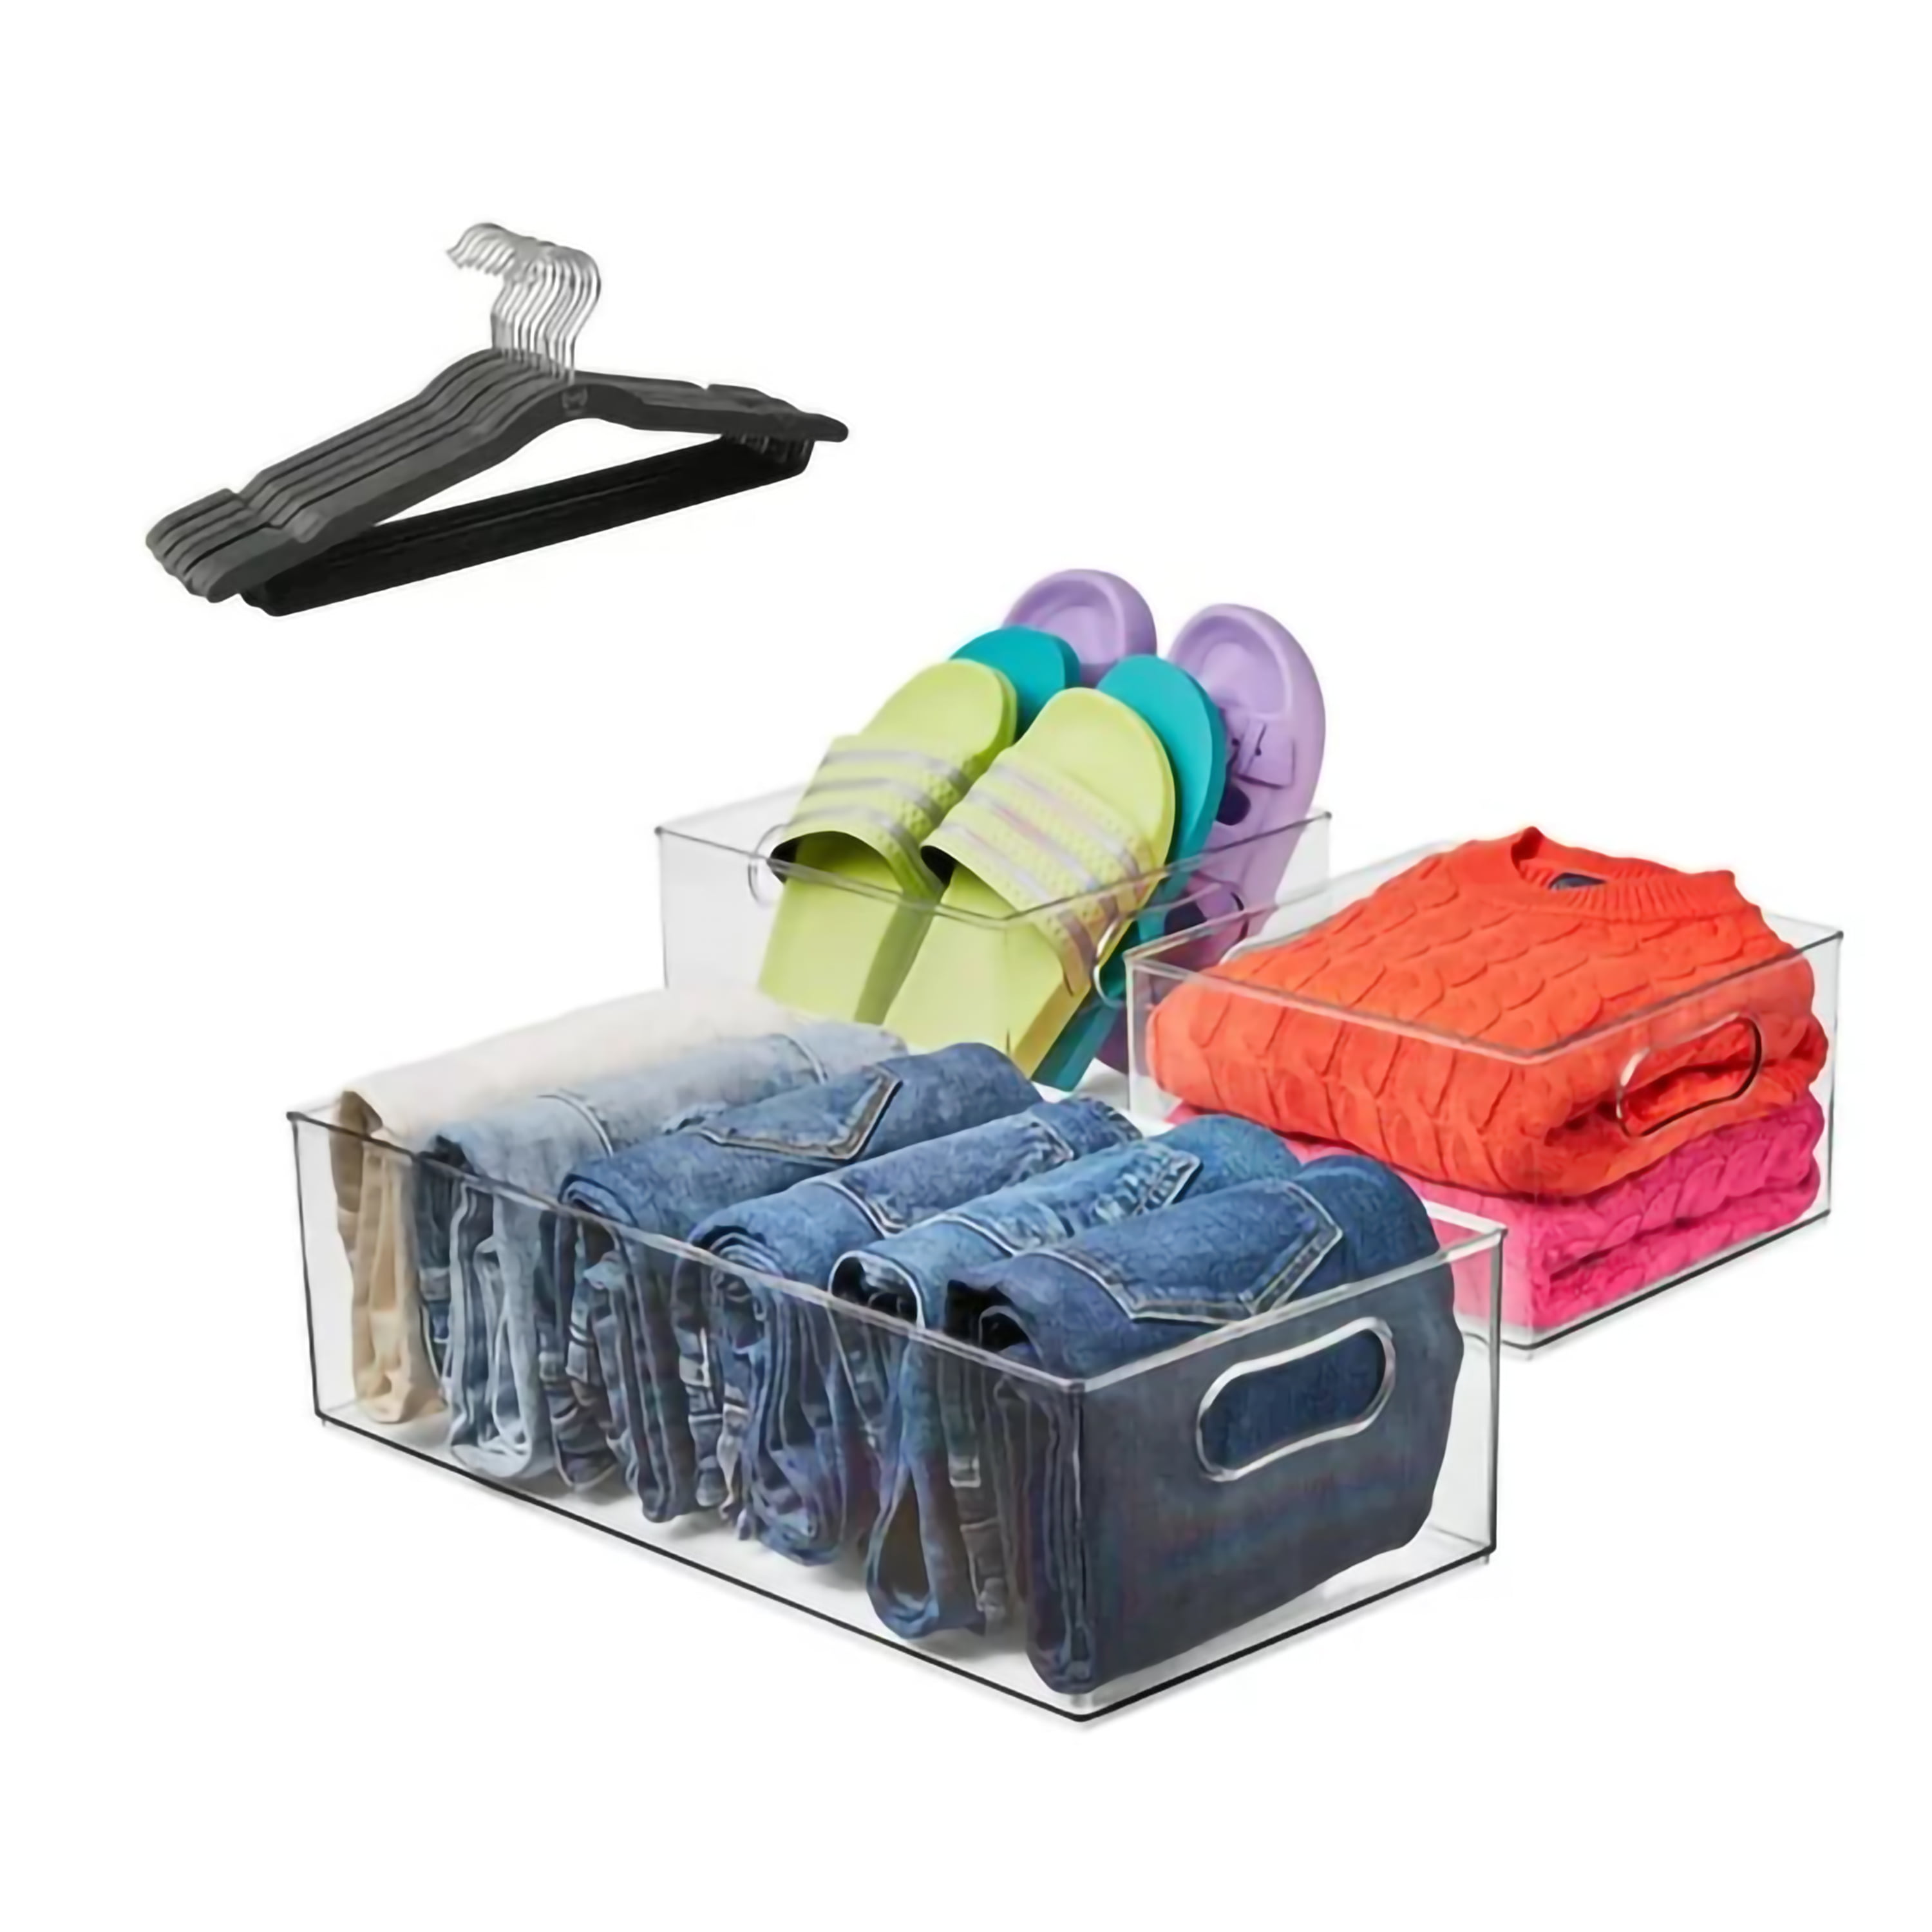 15-Piece The Home Edit Closet Organizing Set w/ 3 Containers & 12 Hangers $14.53 + Free S&H w/ Walmart+ or $35+